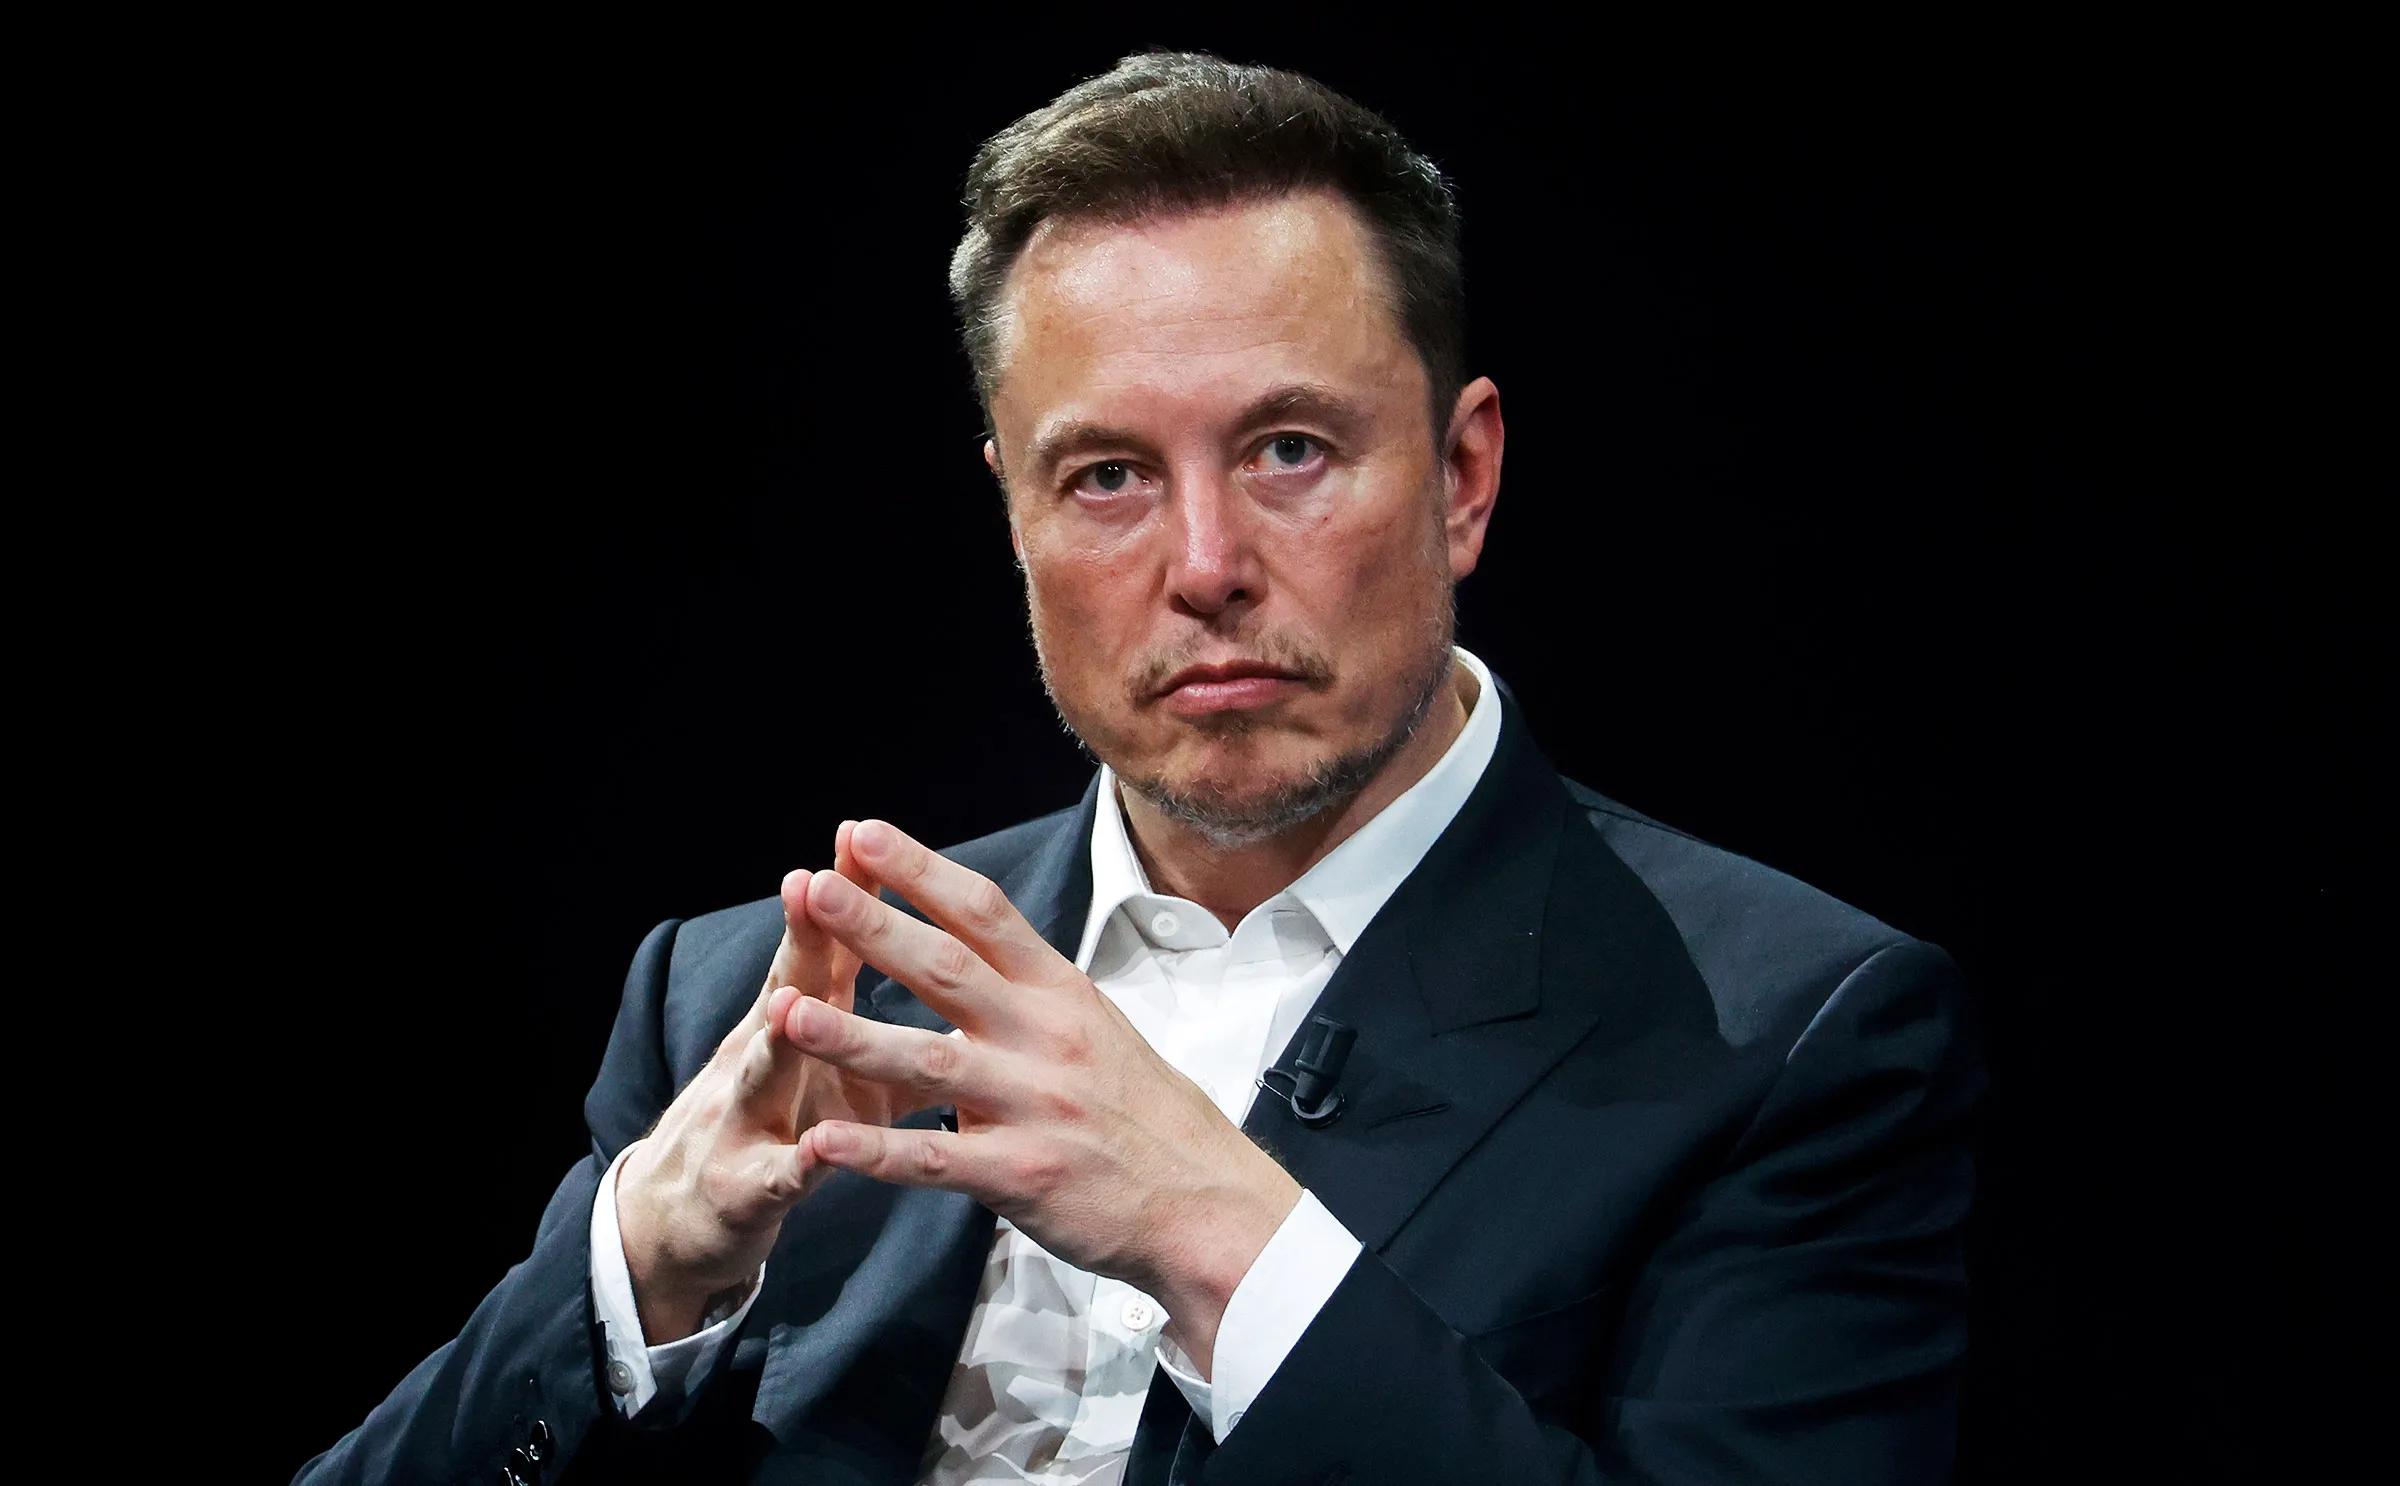 How Elon Musk Started and Became the World's Richest Person